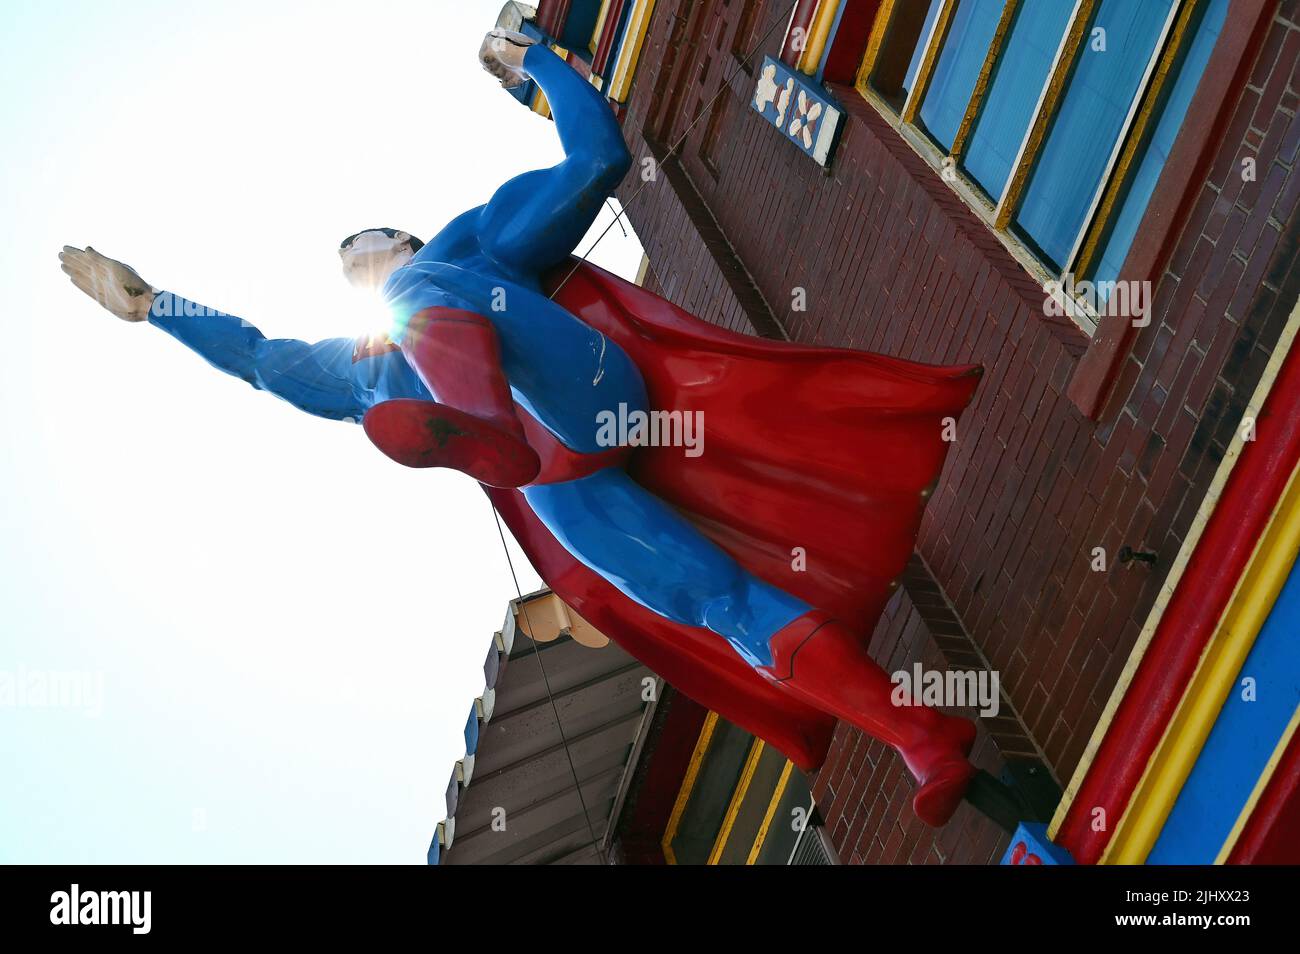 Superman statue at the Superman Museum in the historic district of Metropolis, Illinois, United States of America Stock Photo